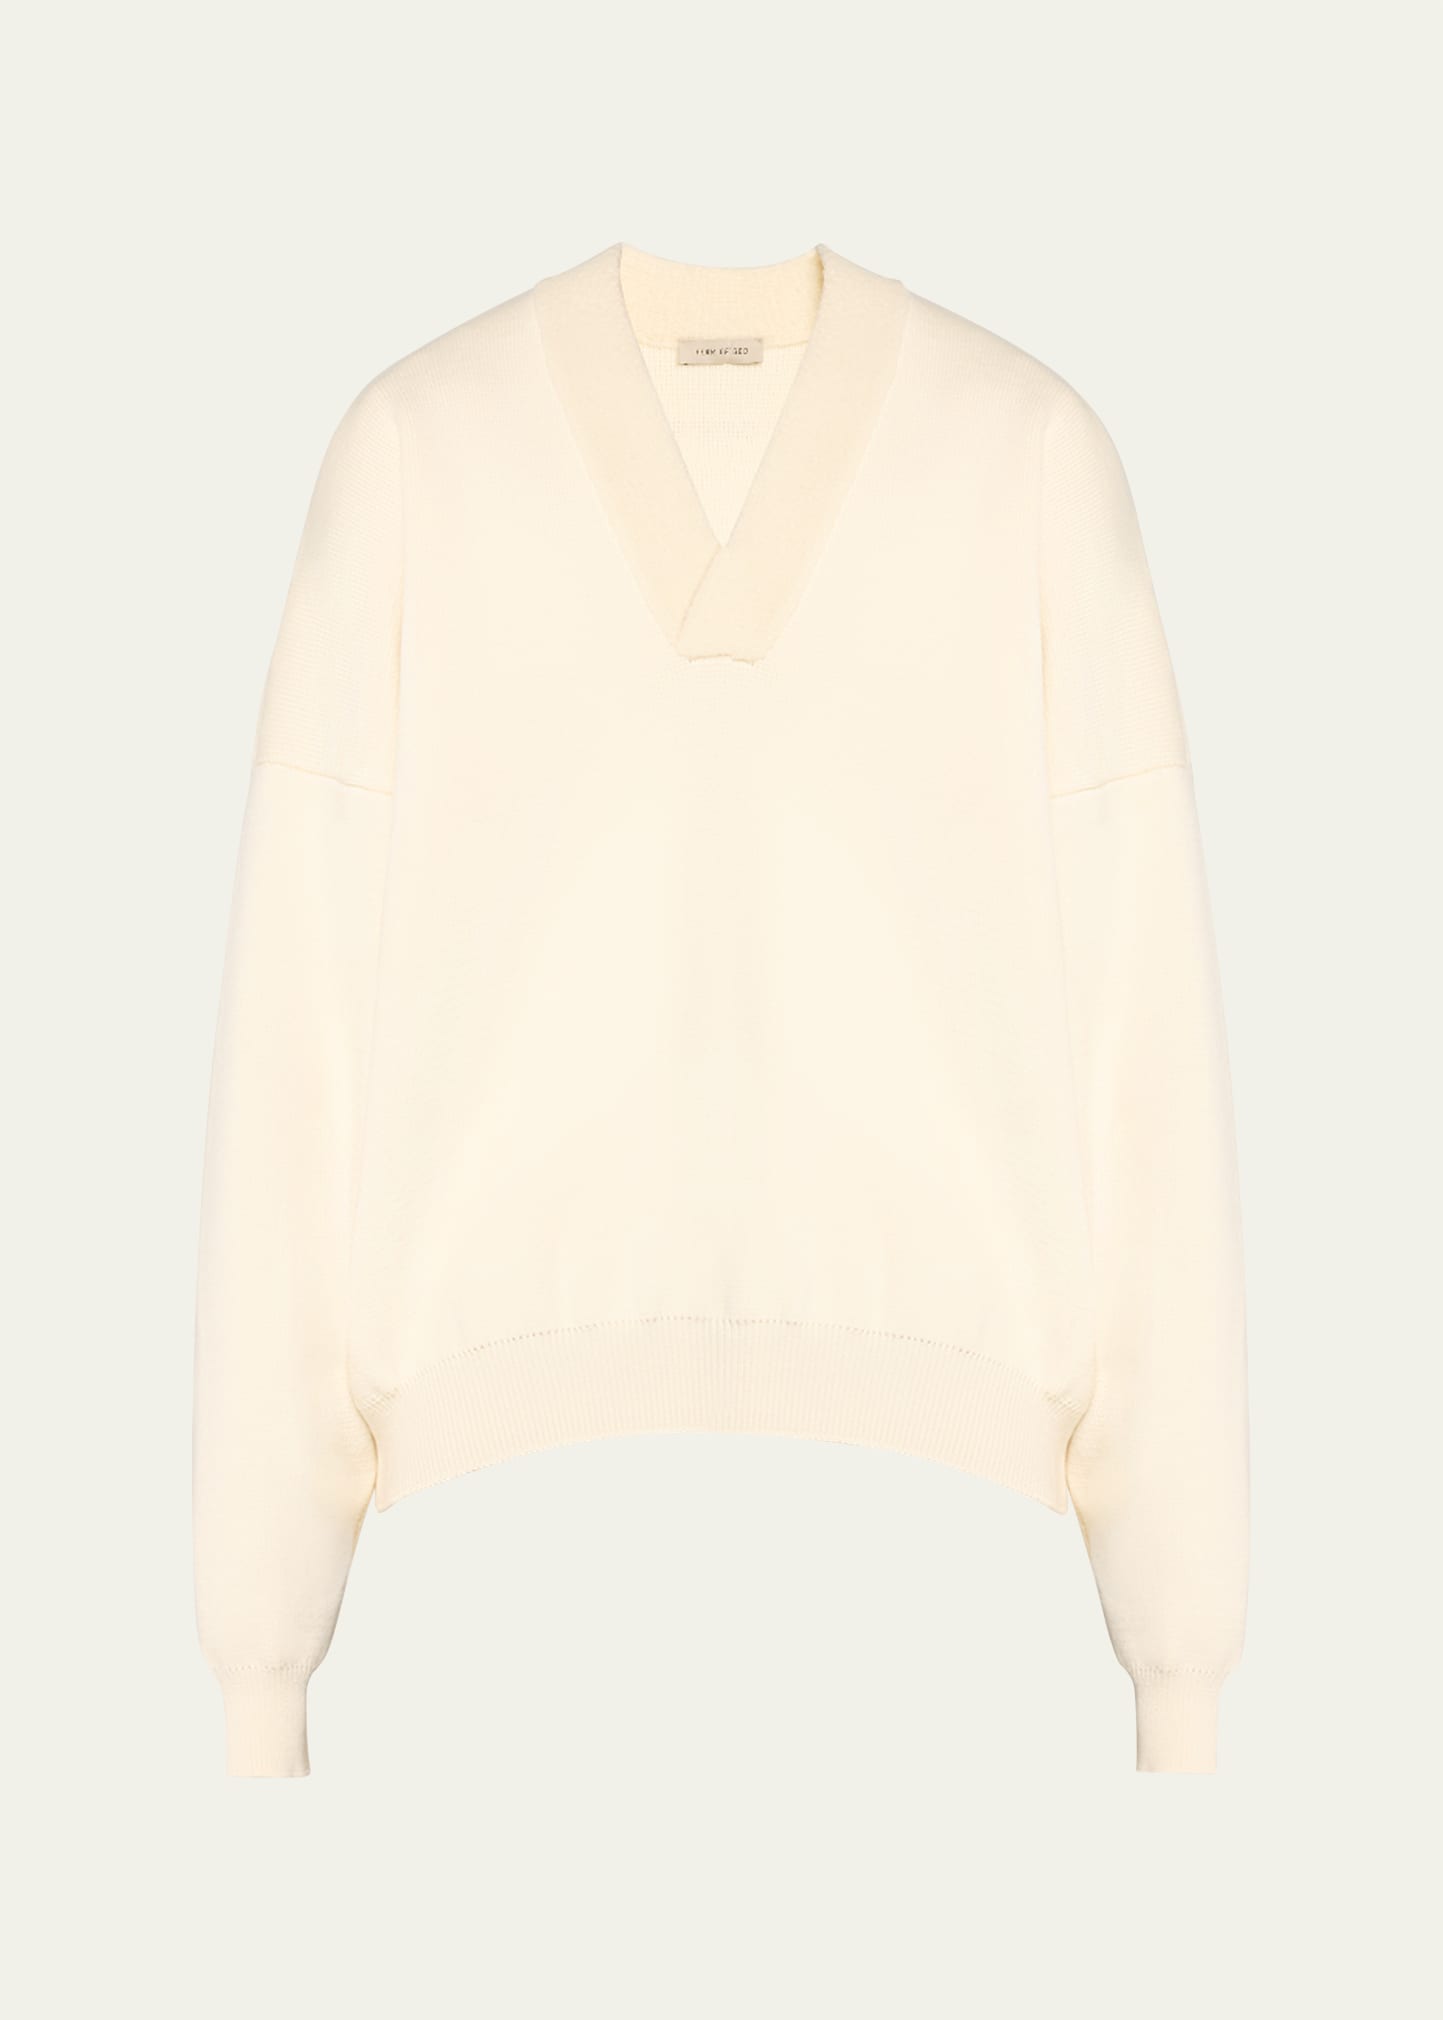 Fear Of God Men's Wool V-neck Sweater In Yellow